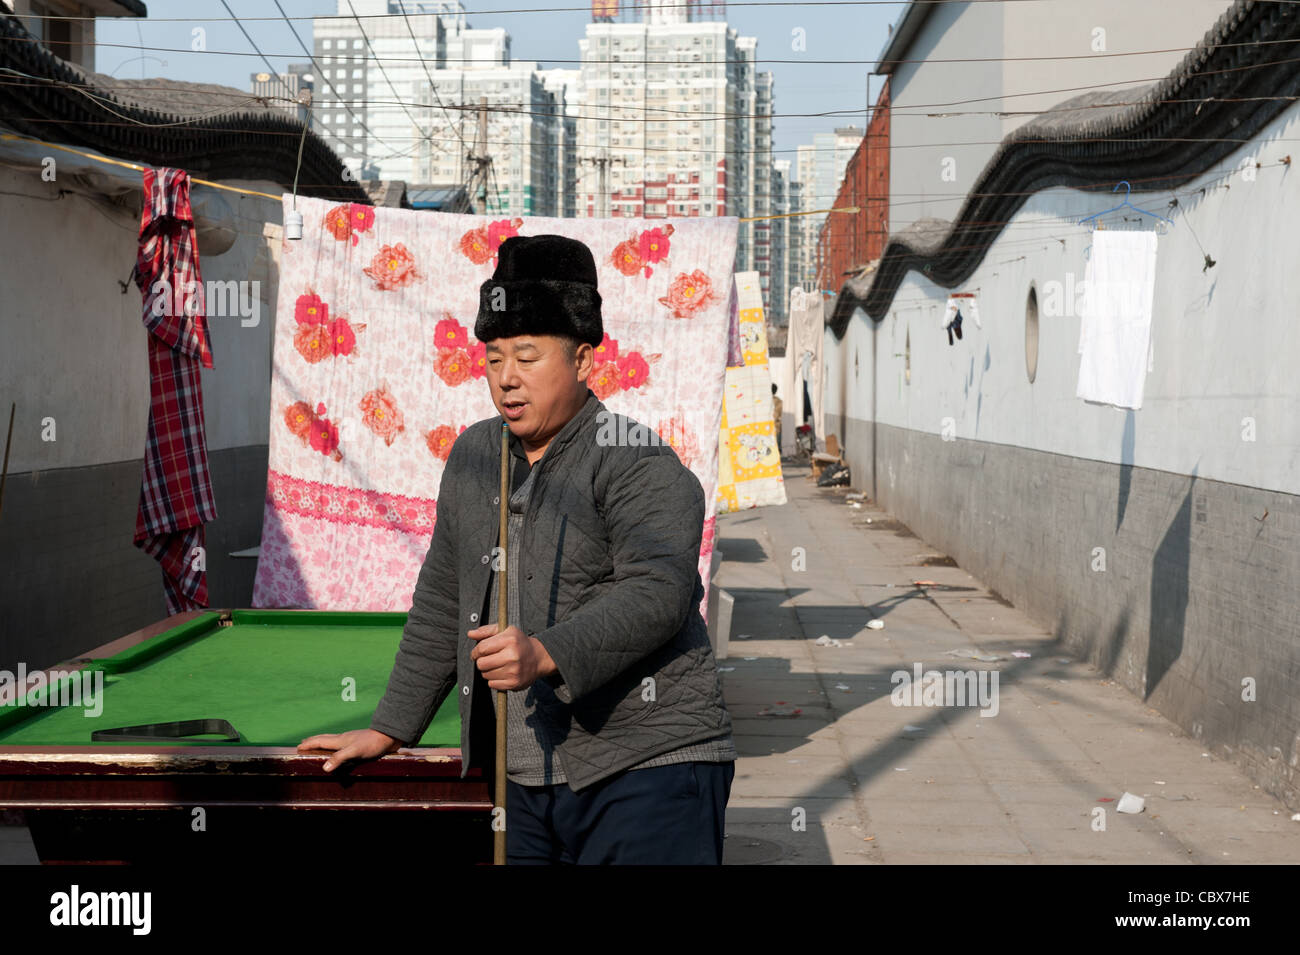 Xiadian, Beijing. Man playing pool in a poor neighborhood with in the background Beijing's Central Business District. Stock Photo